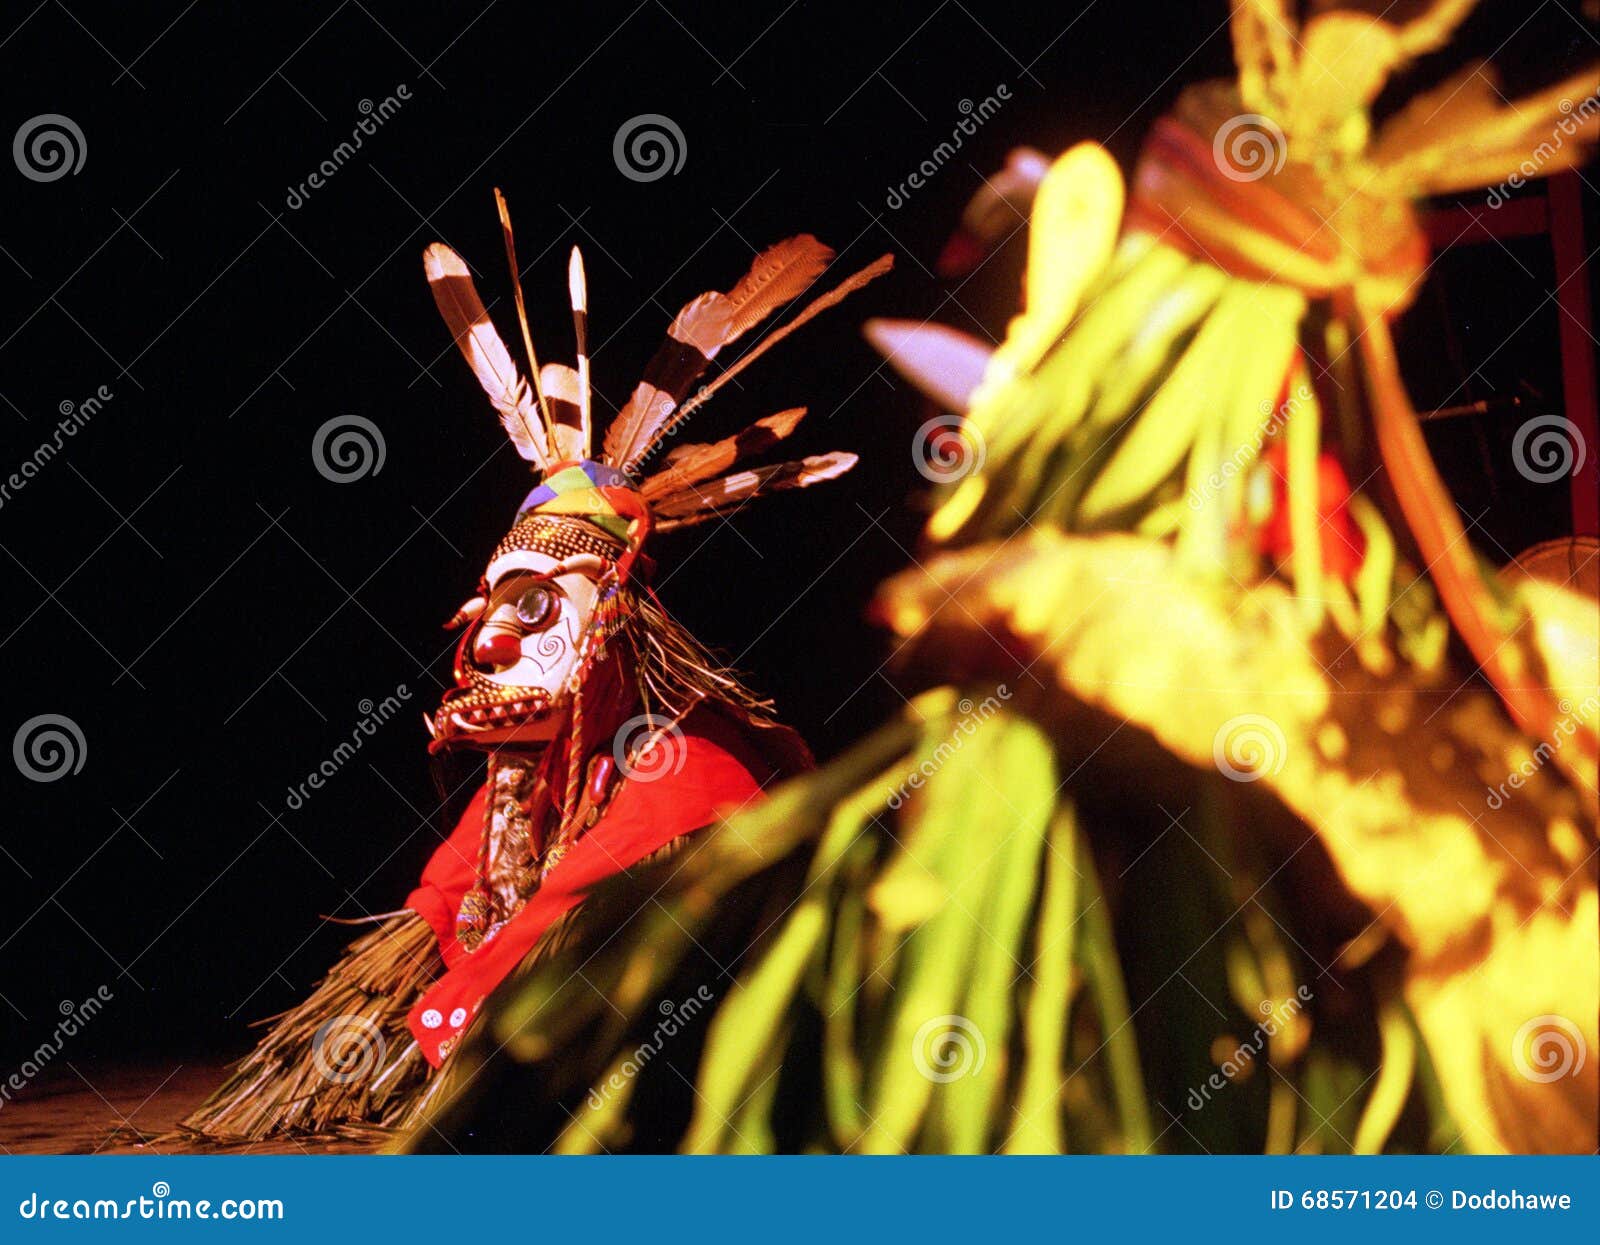 Enggang dancer from Dayak editorial stock image. Image of borneo - 68571204